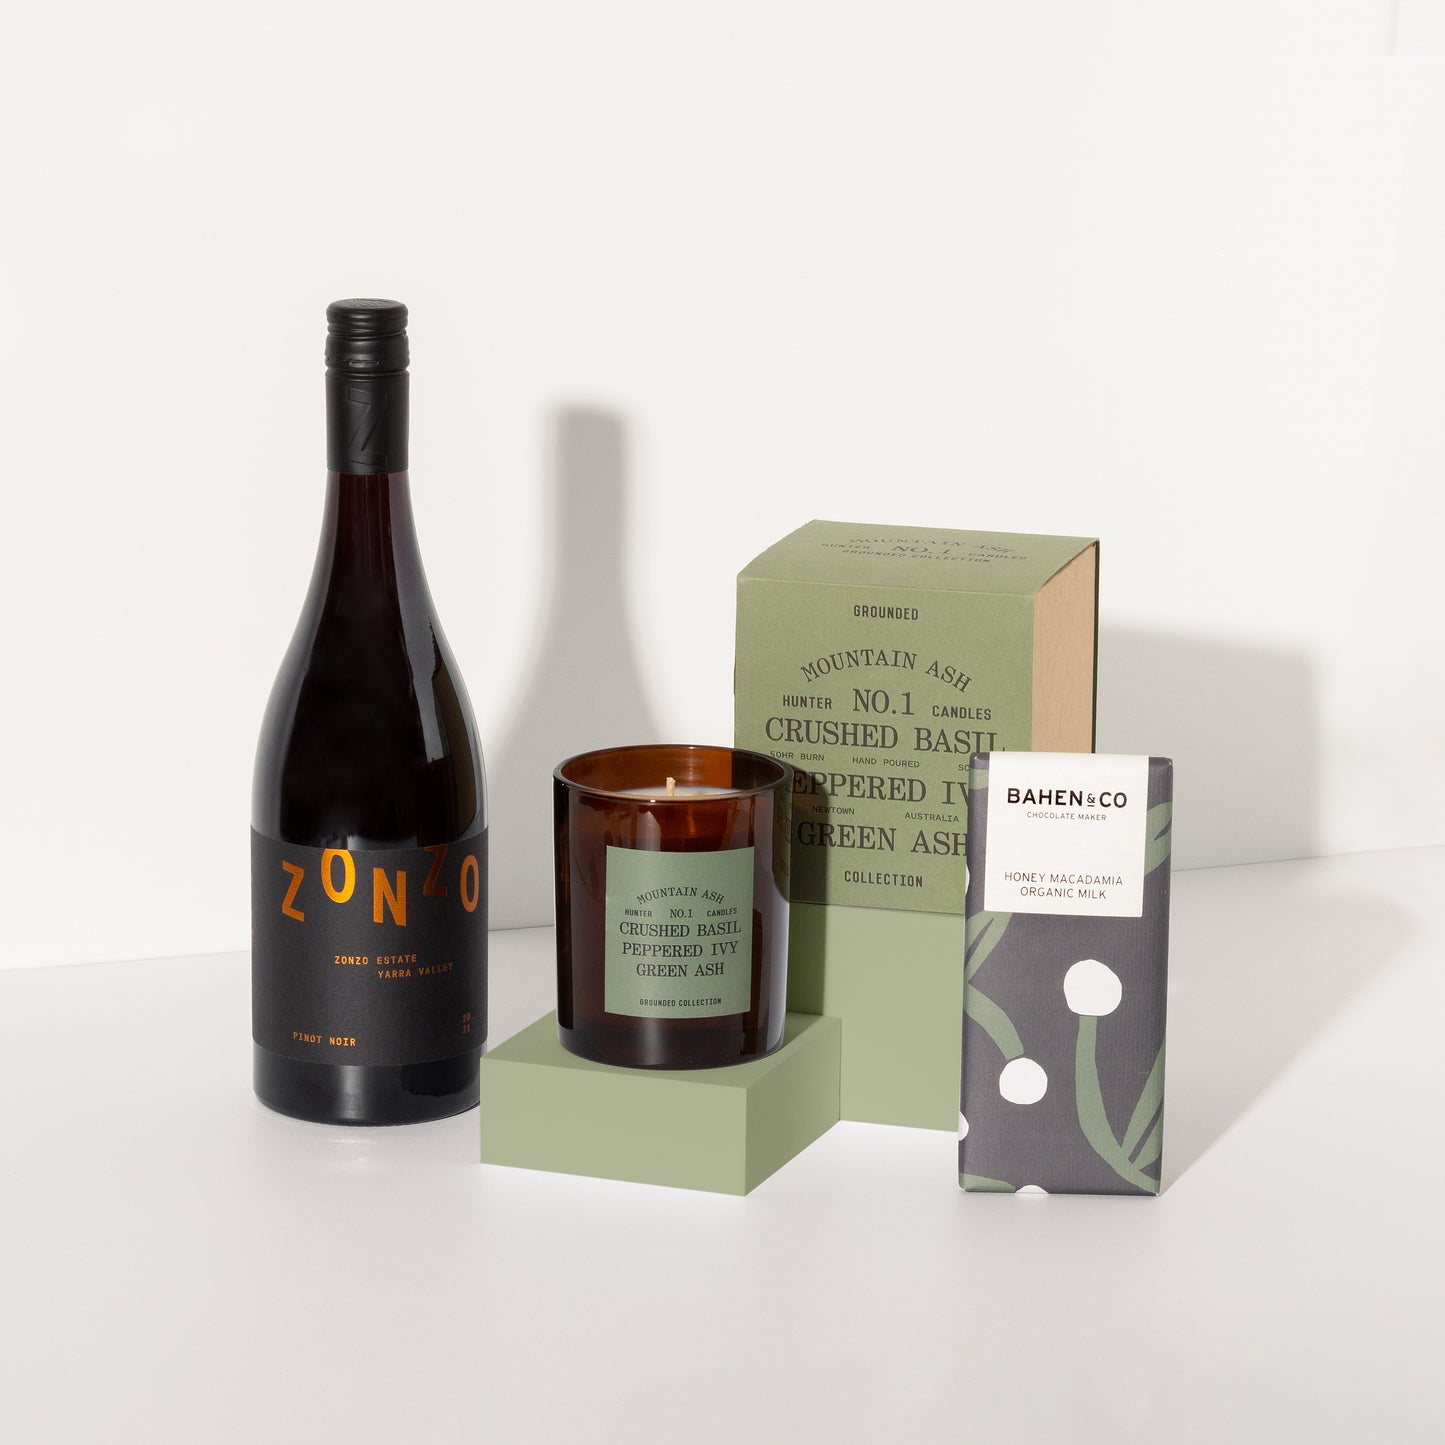 Bespoke Lane and co gift hampers Brisbane Australia Corporate Gifting delivery  australia wide chic trio gifting corporate classic zonzo estate hunter candle basil bahen and co organic honey macadamia